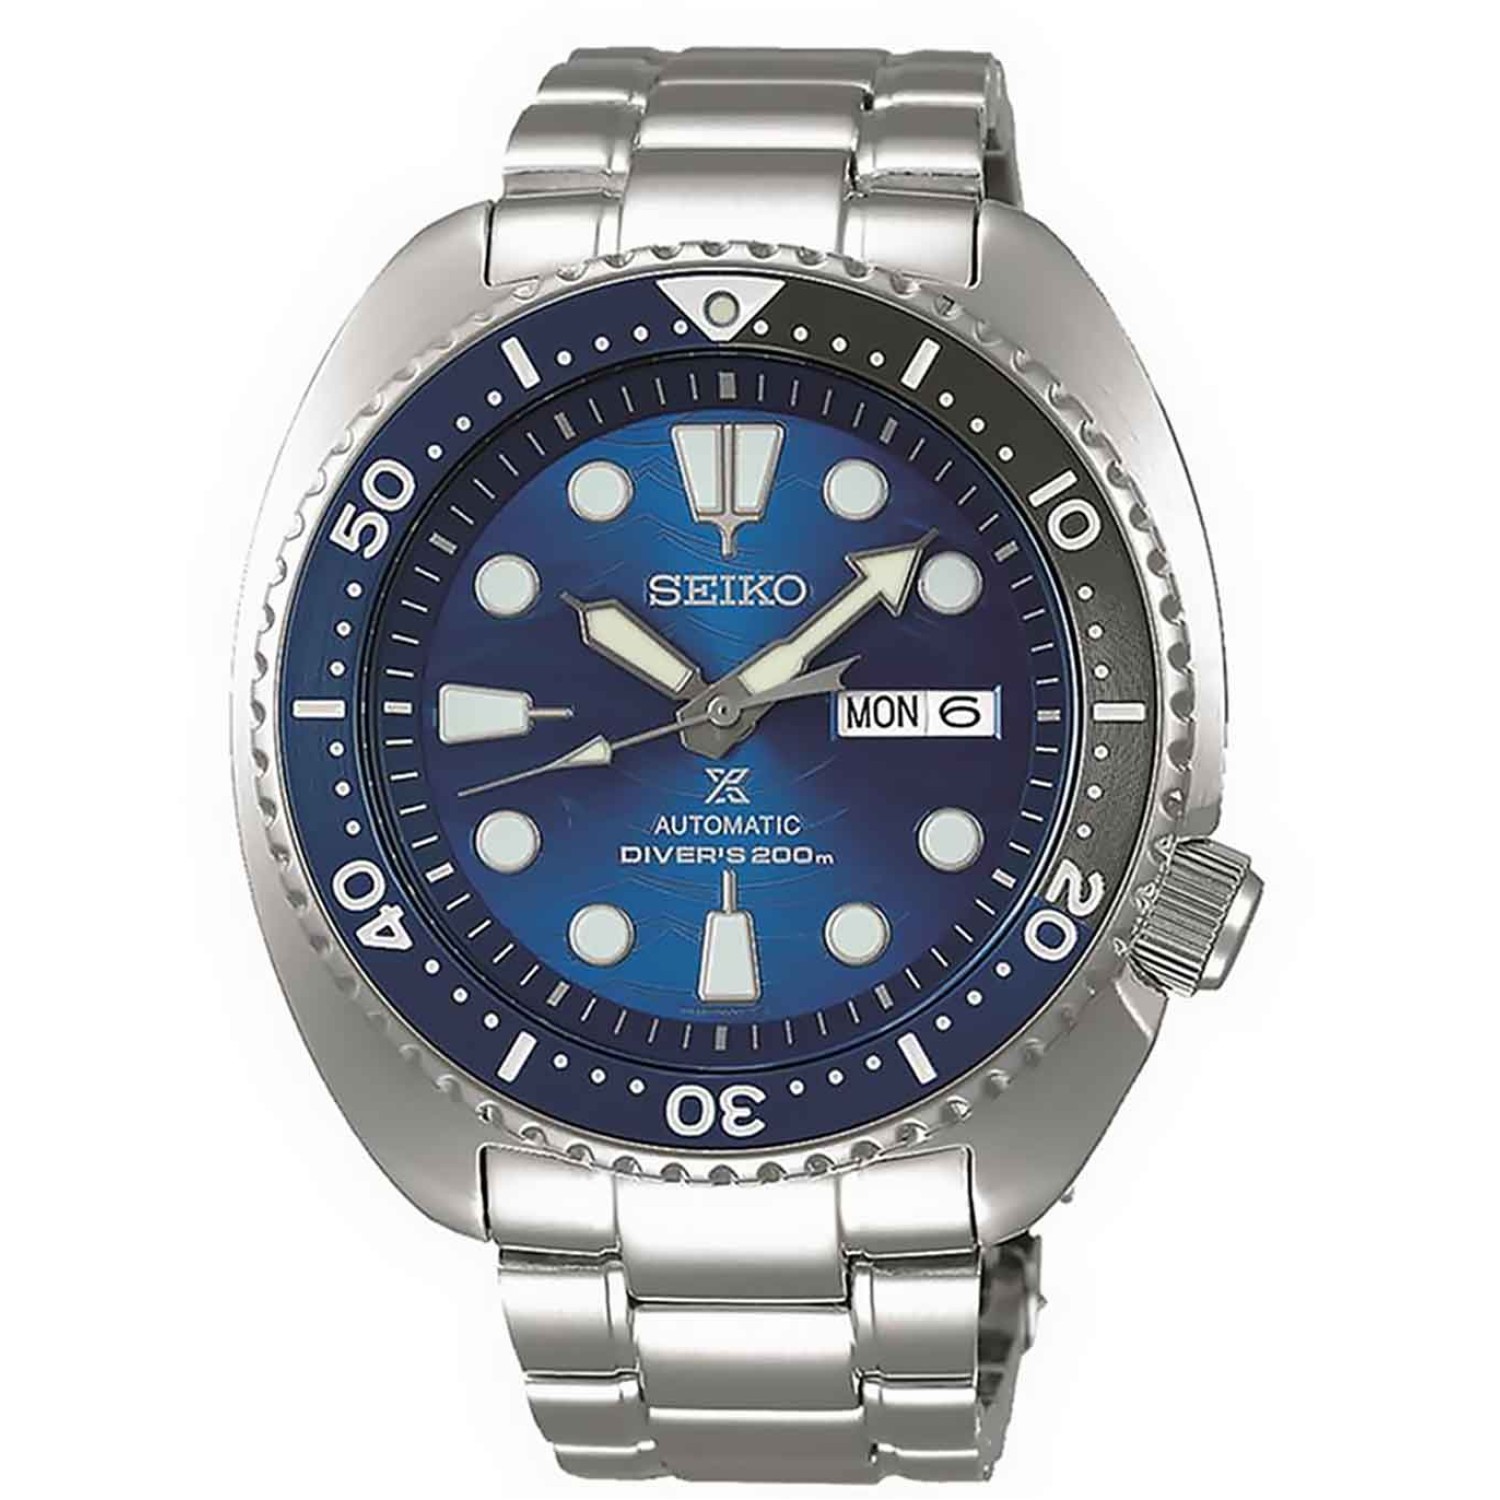 SRPD21K Seiko Fabien Cousteau Save the Ocean Special Edition. Special Edition Save The Ocean. Presented In A Special Box   LAYBUY - Pay it easy, in 6 weekly payments and have it now. Only pay the price of your purchase, when you pay your instalments on ti